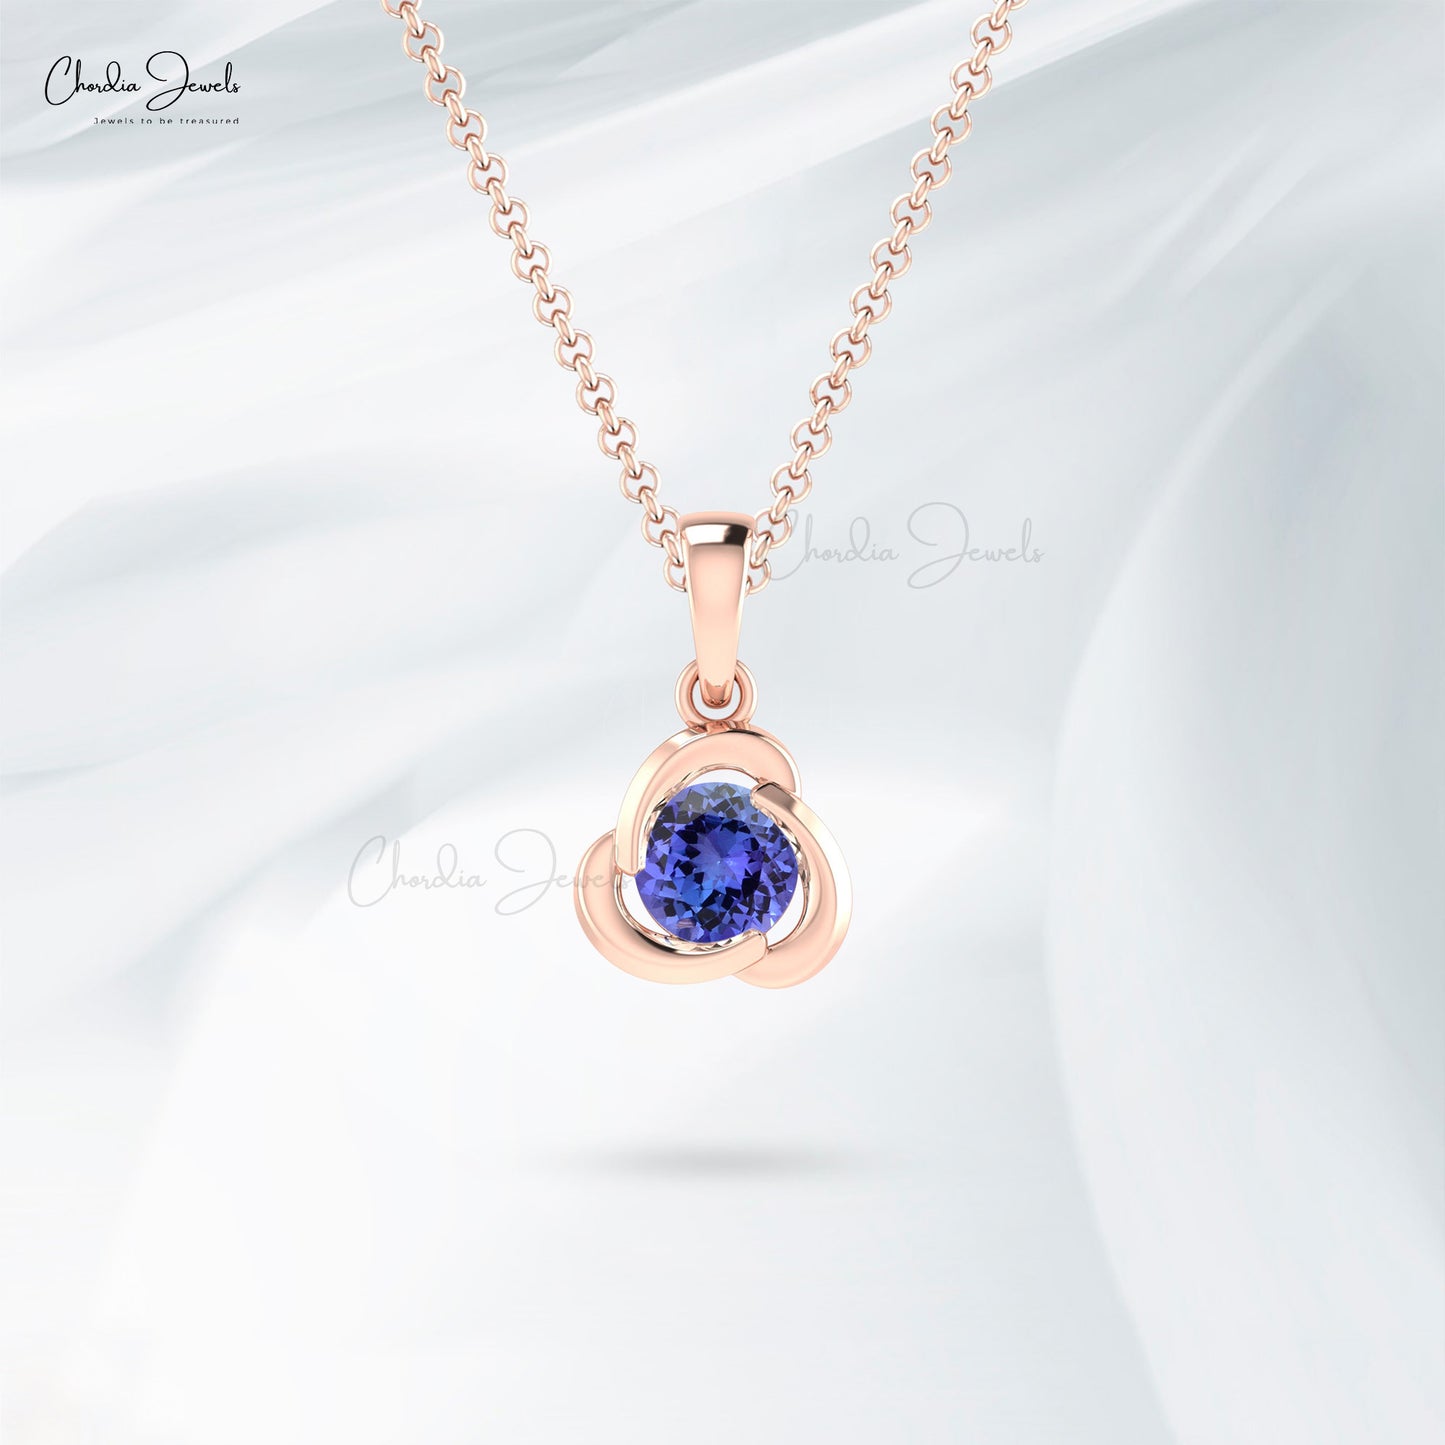 Real Blue Tanzanite Twisted Pendant 14k Real Gold December Birthstone Pendant 7mm Round Cut Genuine Gemstone Jewelry For Anniversary Gift